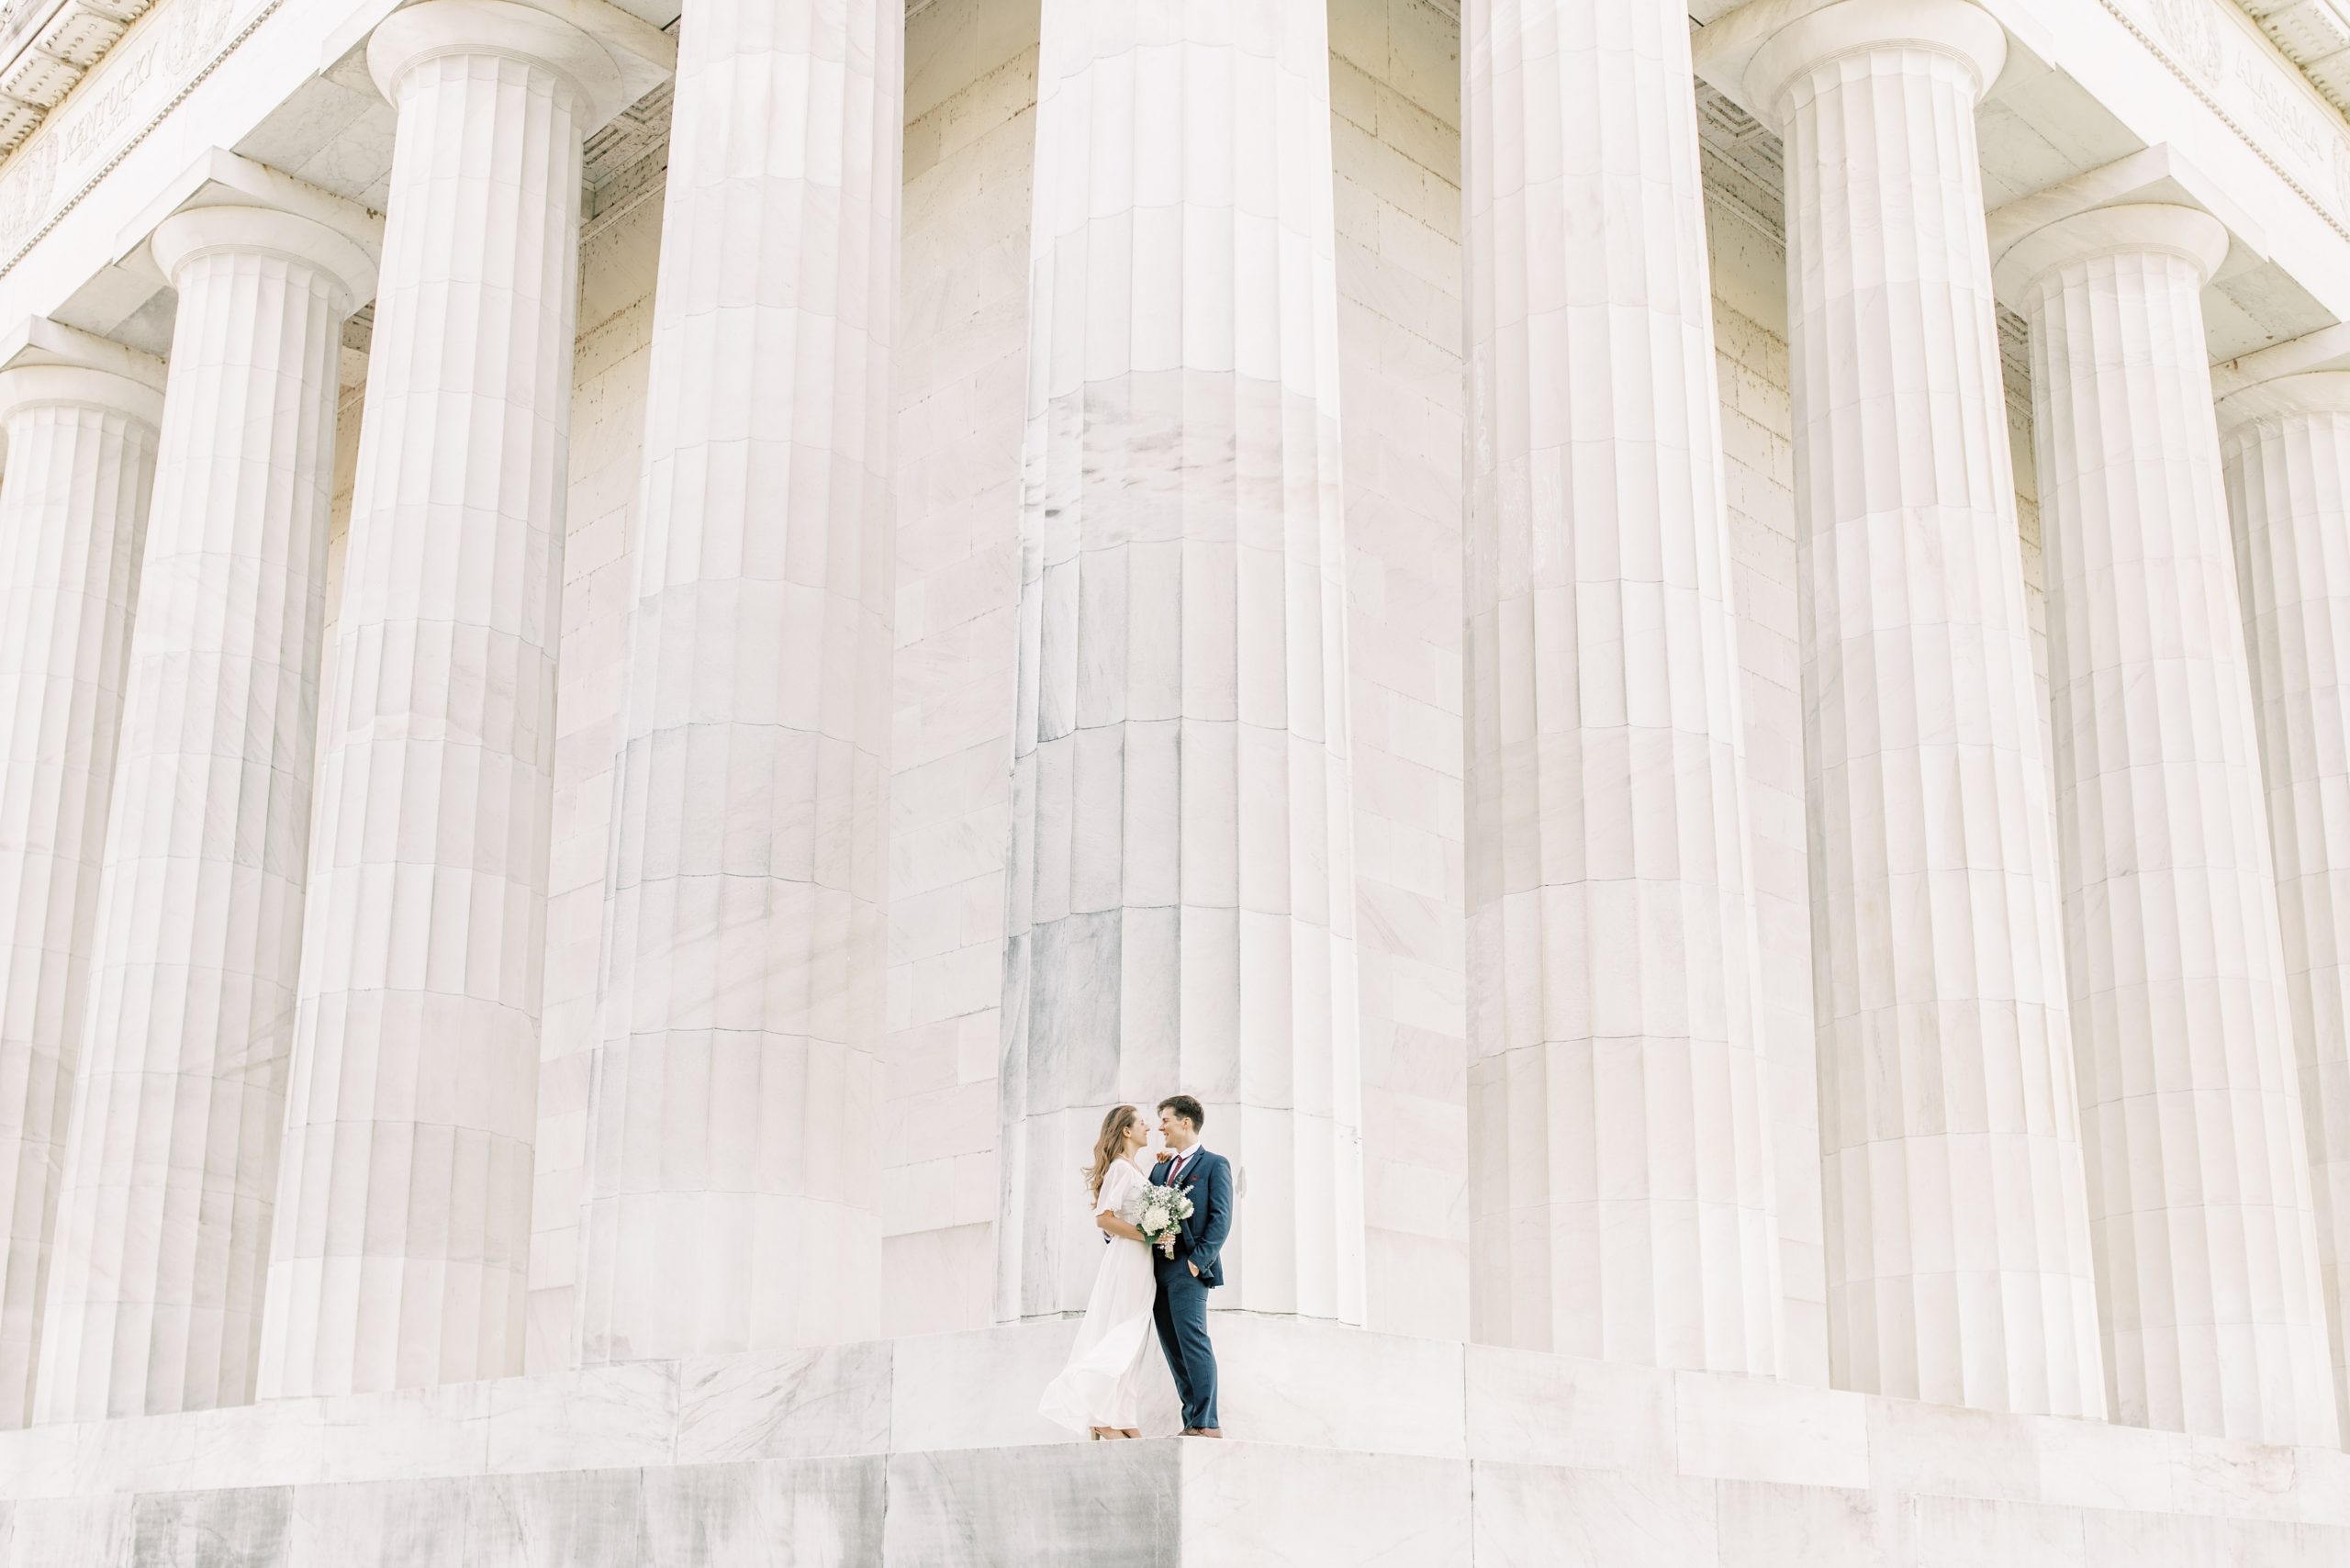 An intimate fall elopement at the DC War Memorial in Washington, DC with newlywed portraits following at the Lincoln Memorial.